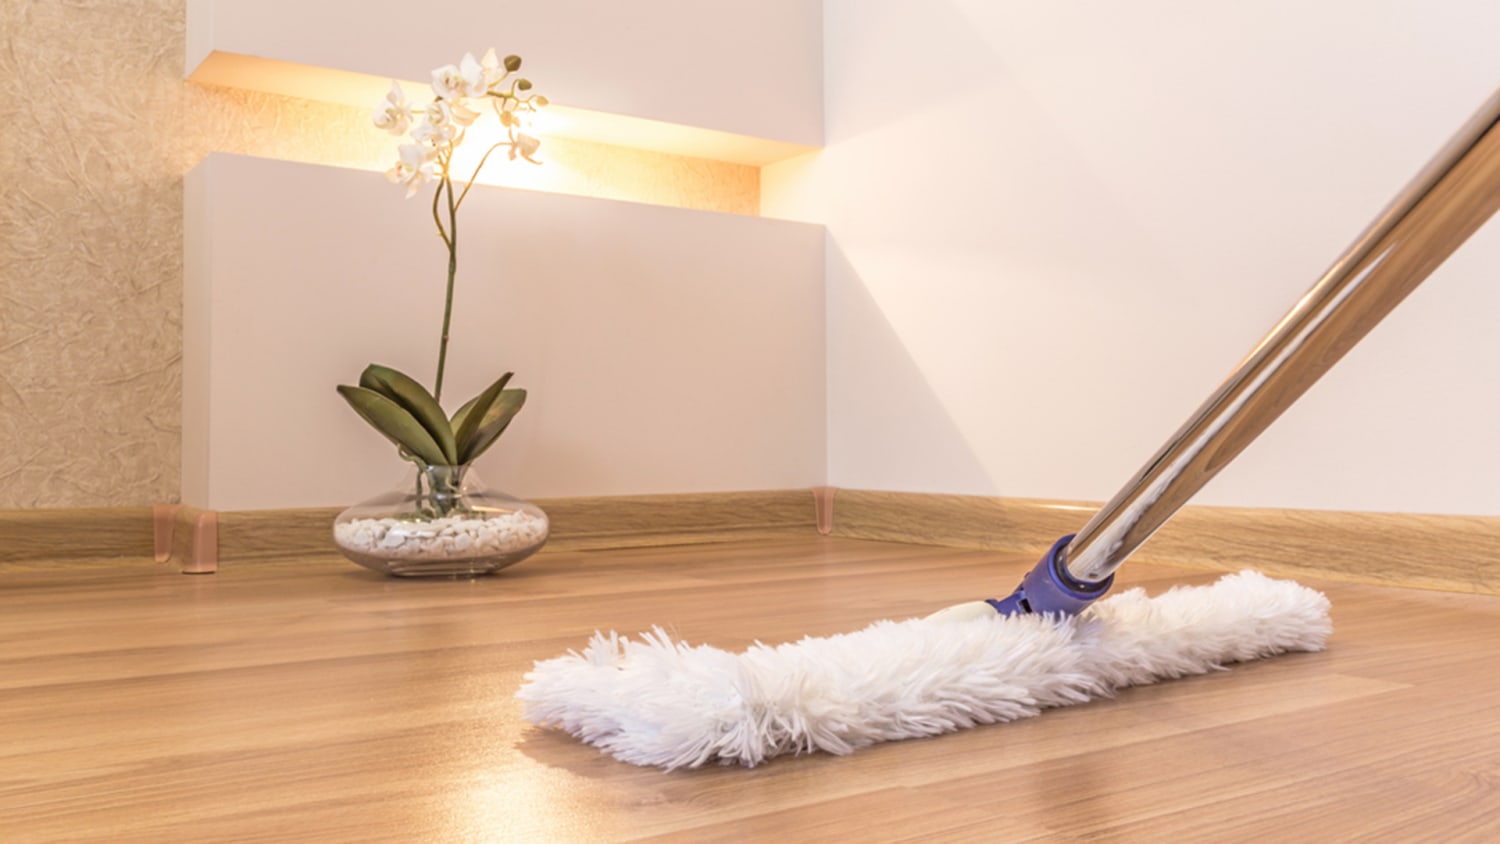 How To Clean Hardwood Floors The Right Way, What Is The Best Cleaner For Hardwood Floors